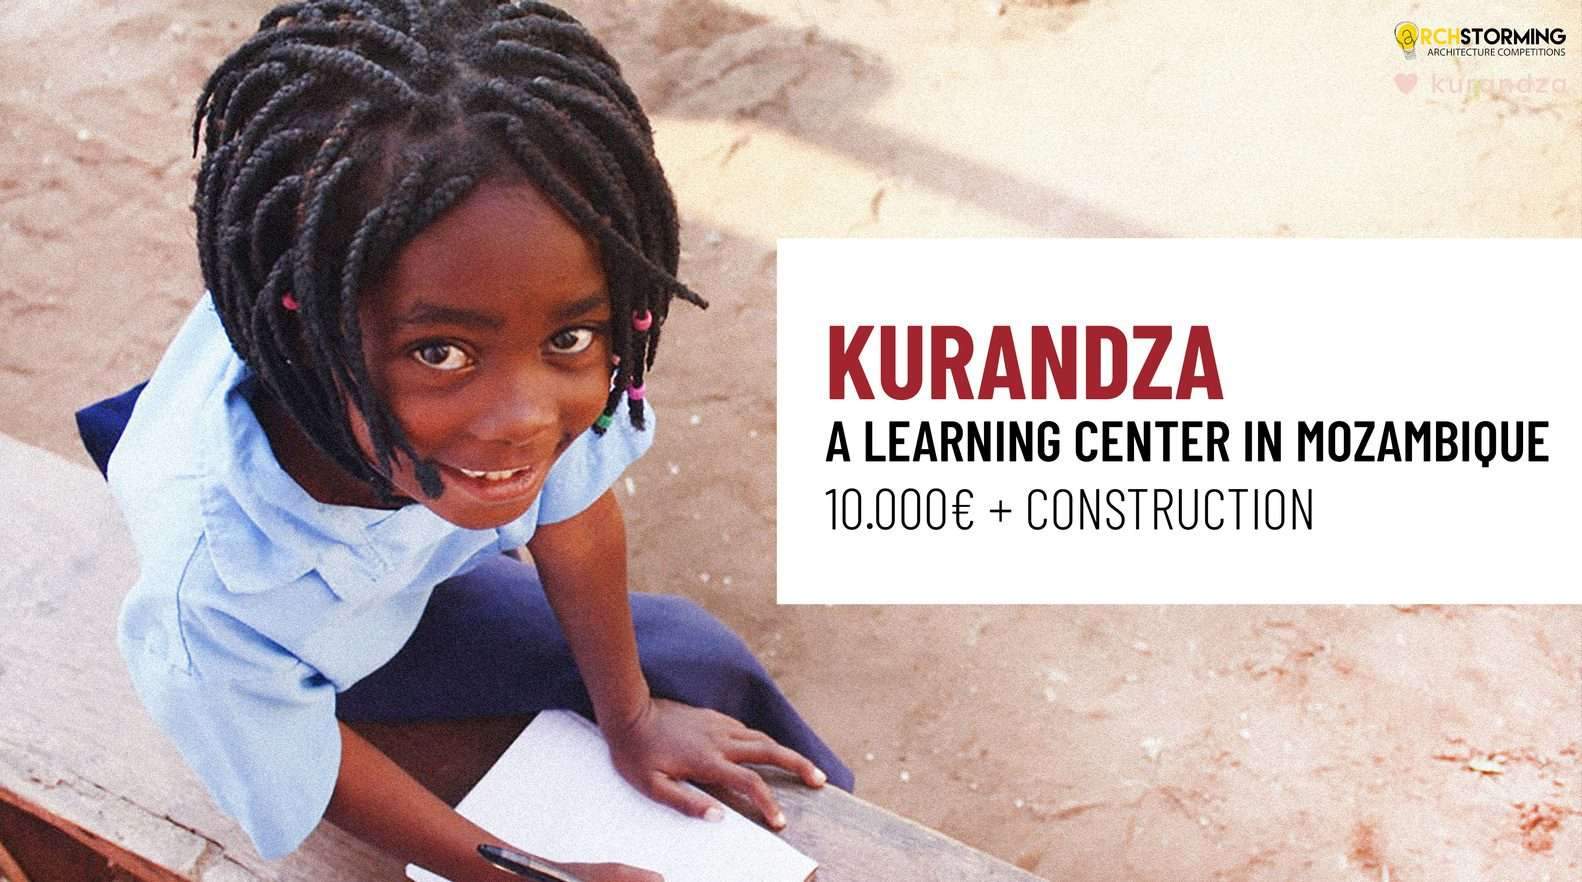 Kurandza: a Learning Center in Mozambique